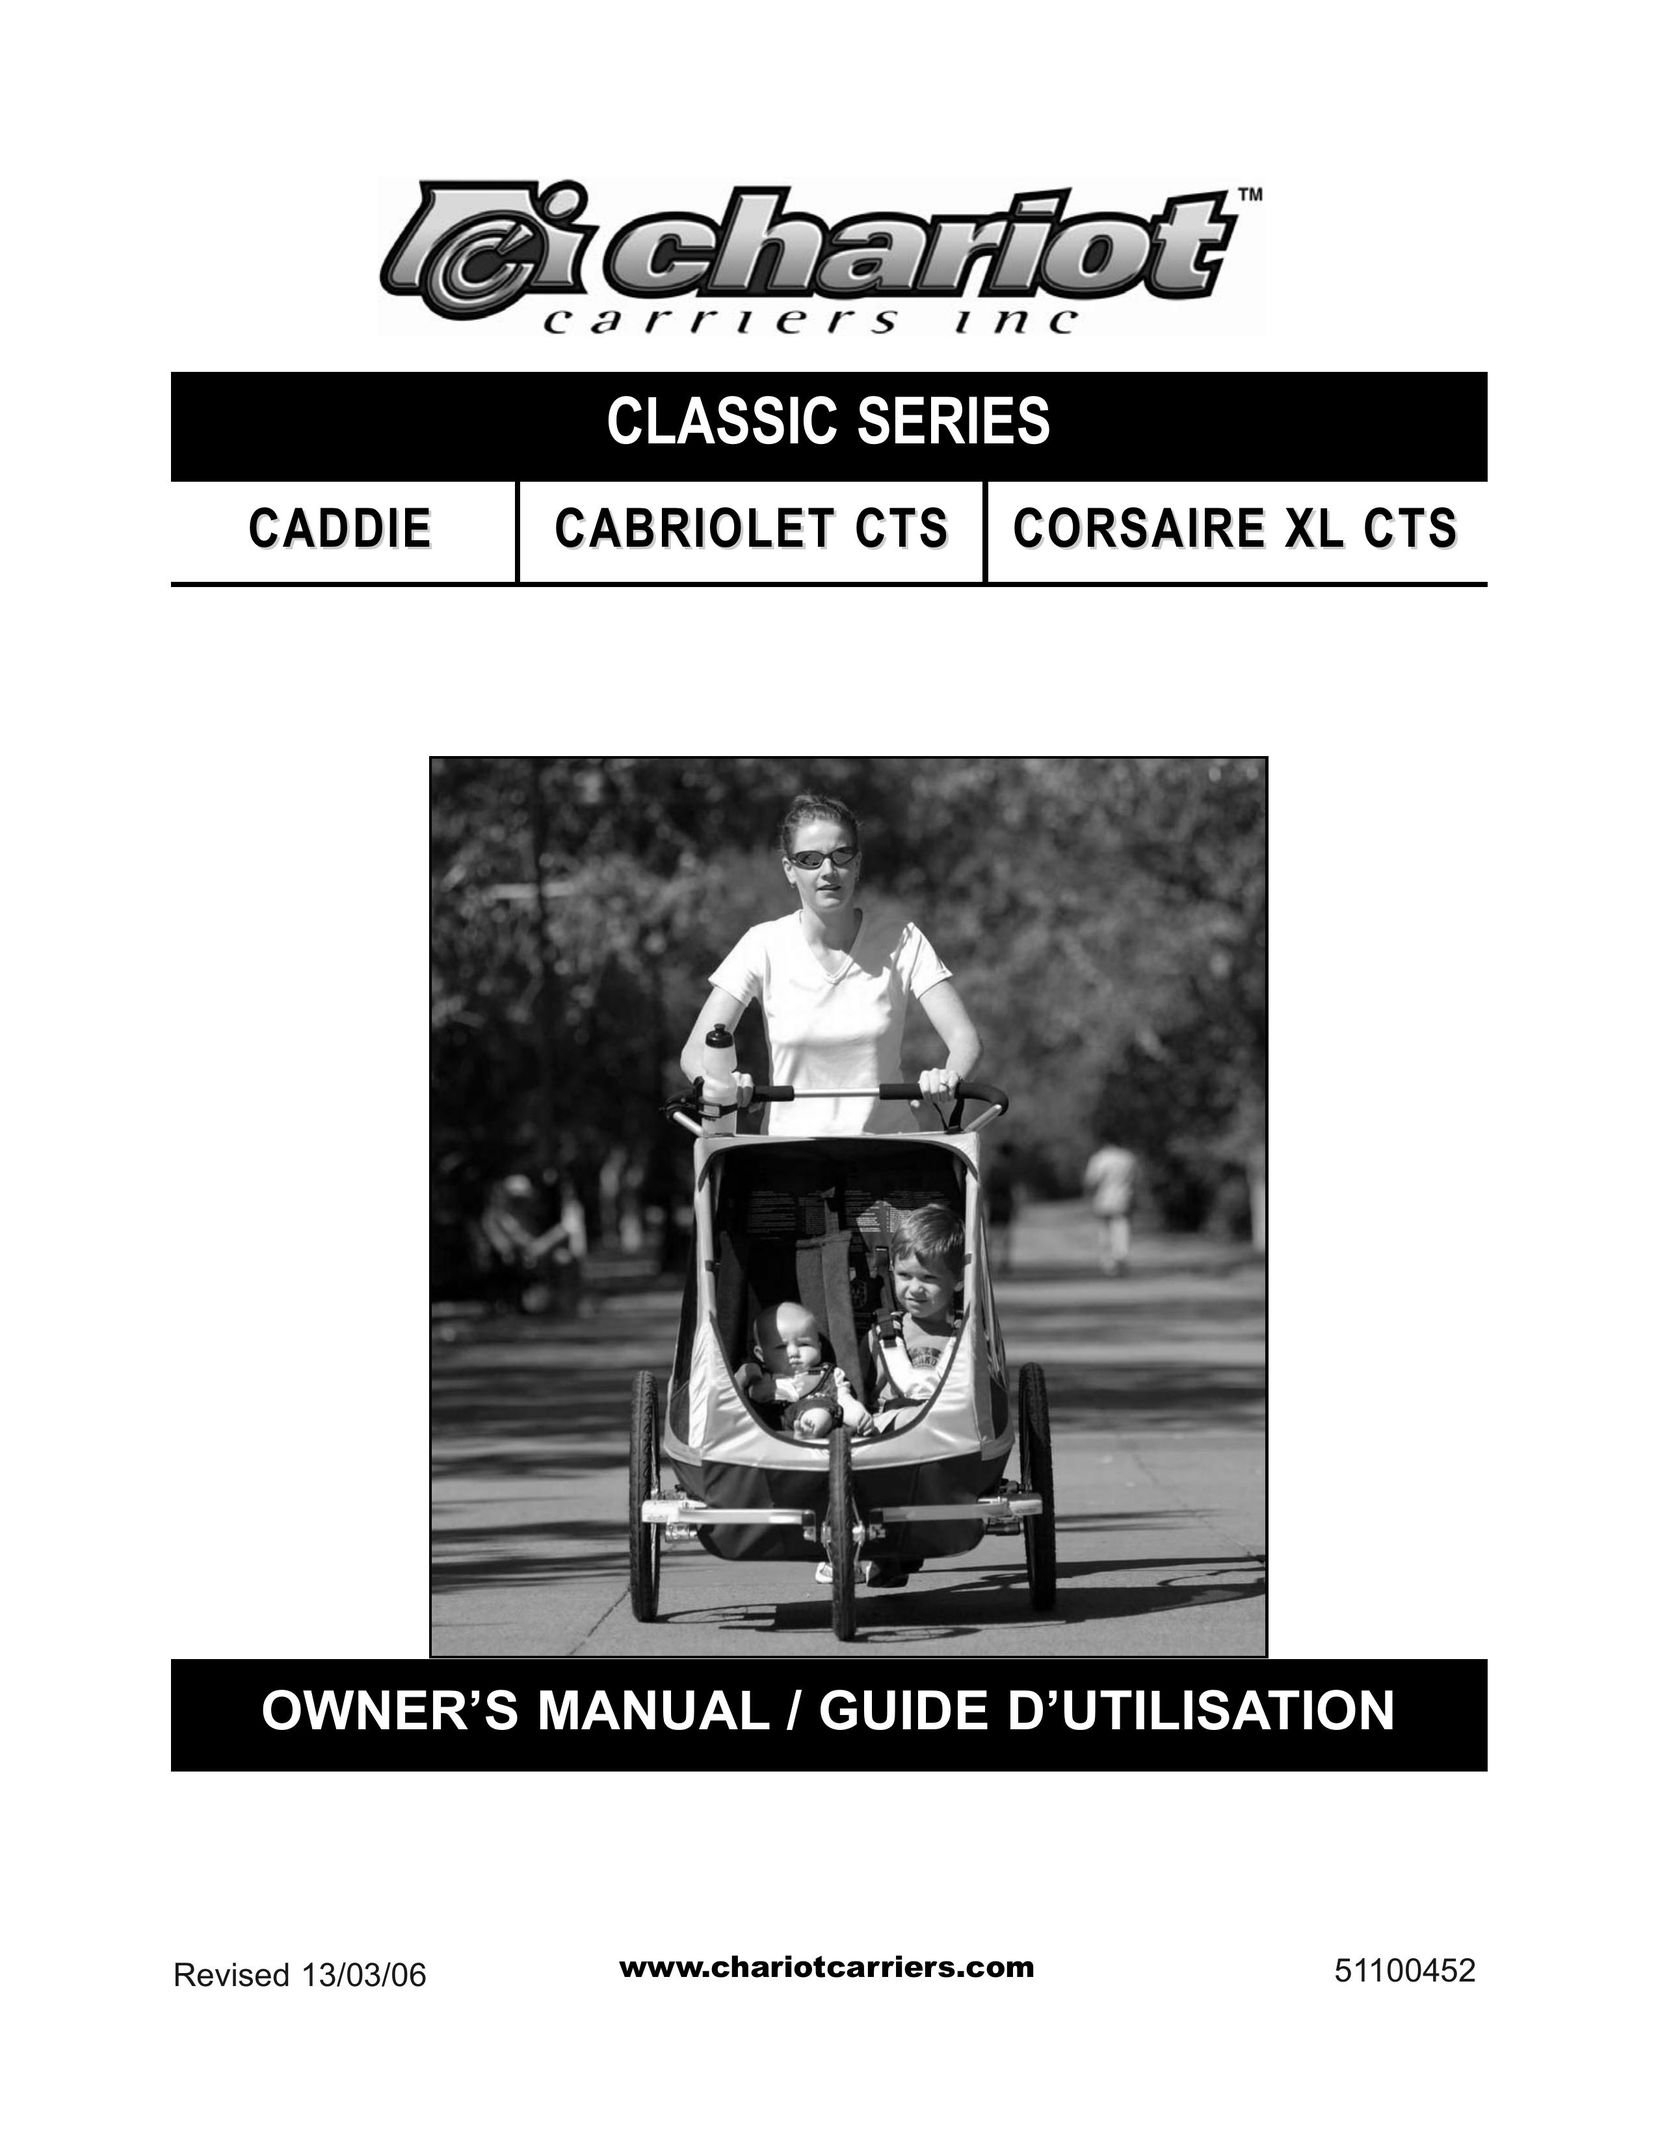 Chariot Carriers CADDIE Stroller User Manual